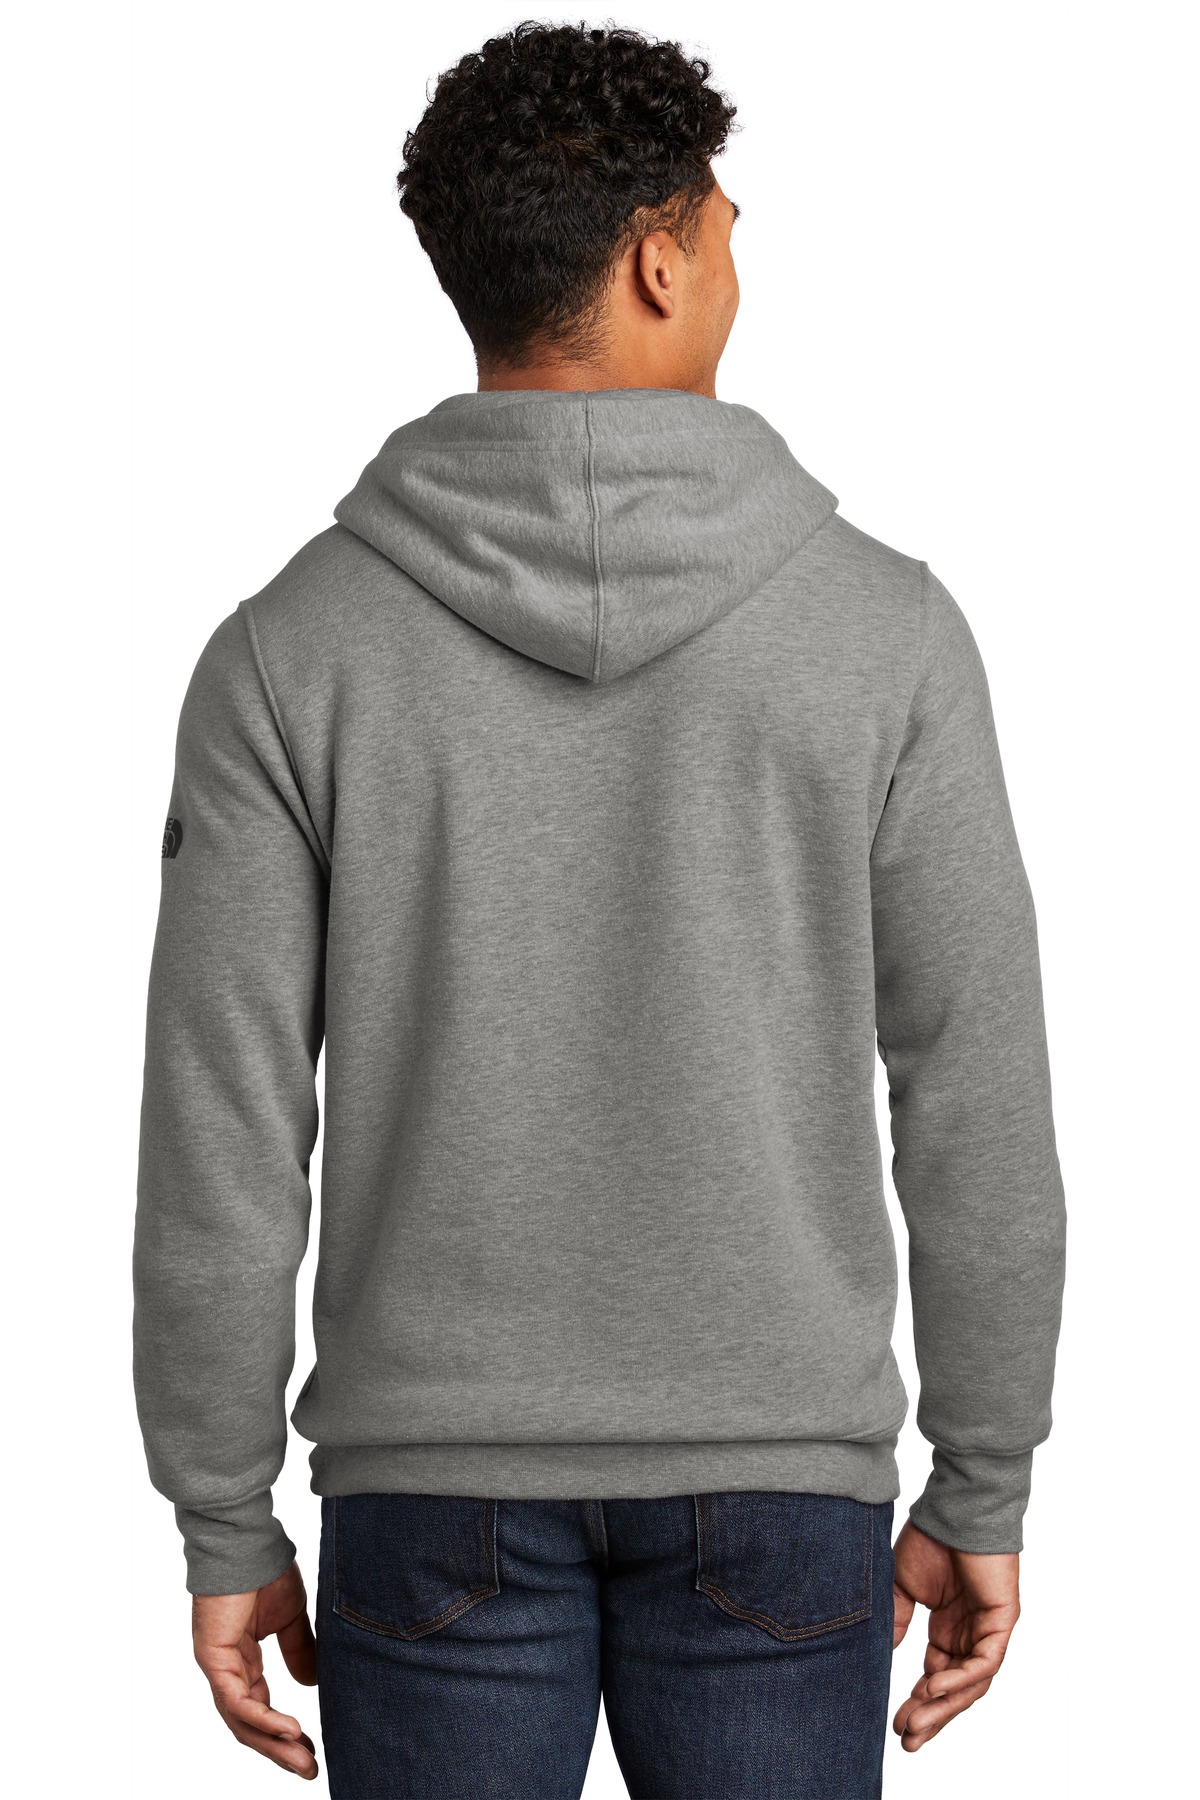 The North Face ® Pullover Hoodie NF0A47FF - Custom Shirt Shop